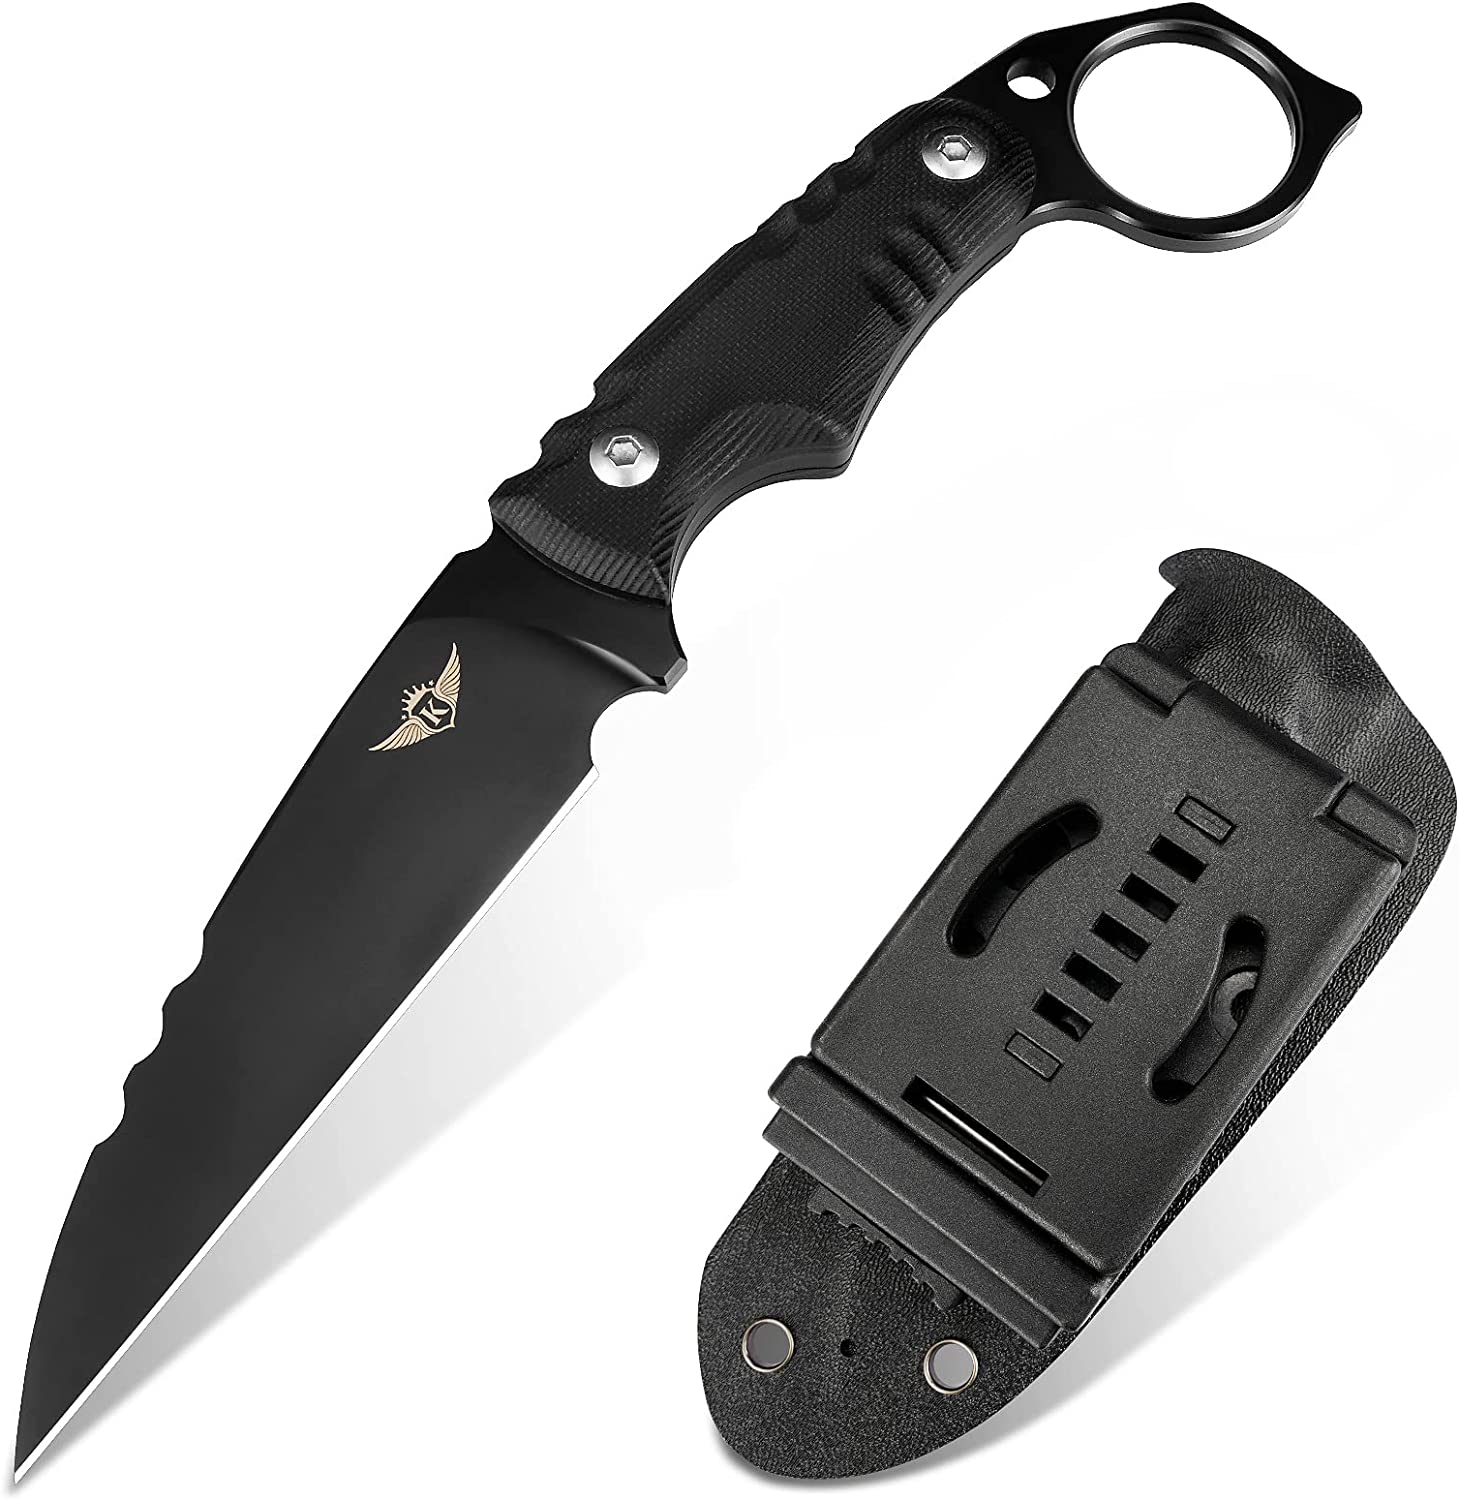  Omesio Neck Knife, 5.82 Fixed Blade Knife with Kydex